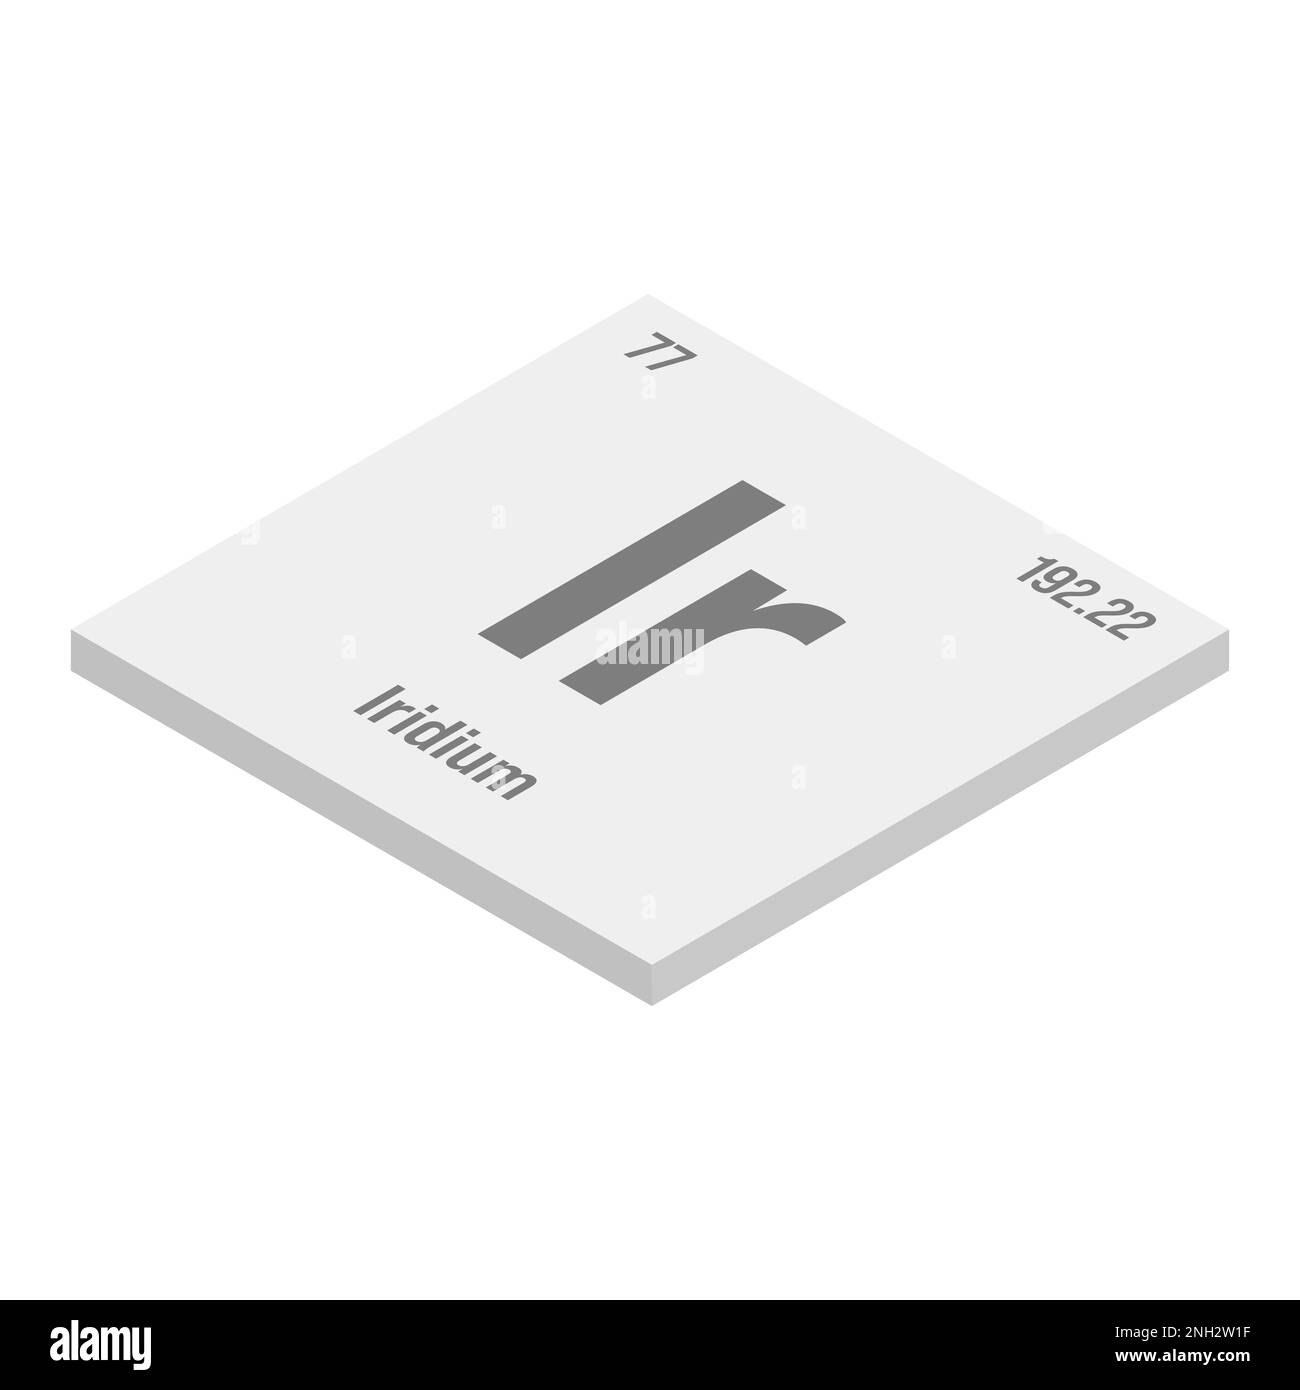 Iridium, Ir, gray 3D isometric illustration of periodic table element with name, symbol, atomic number and weight. Transition metal with various industrial uses, such as in spark plugs, electronics, and as a component of certain alloys. Stock Vector